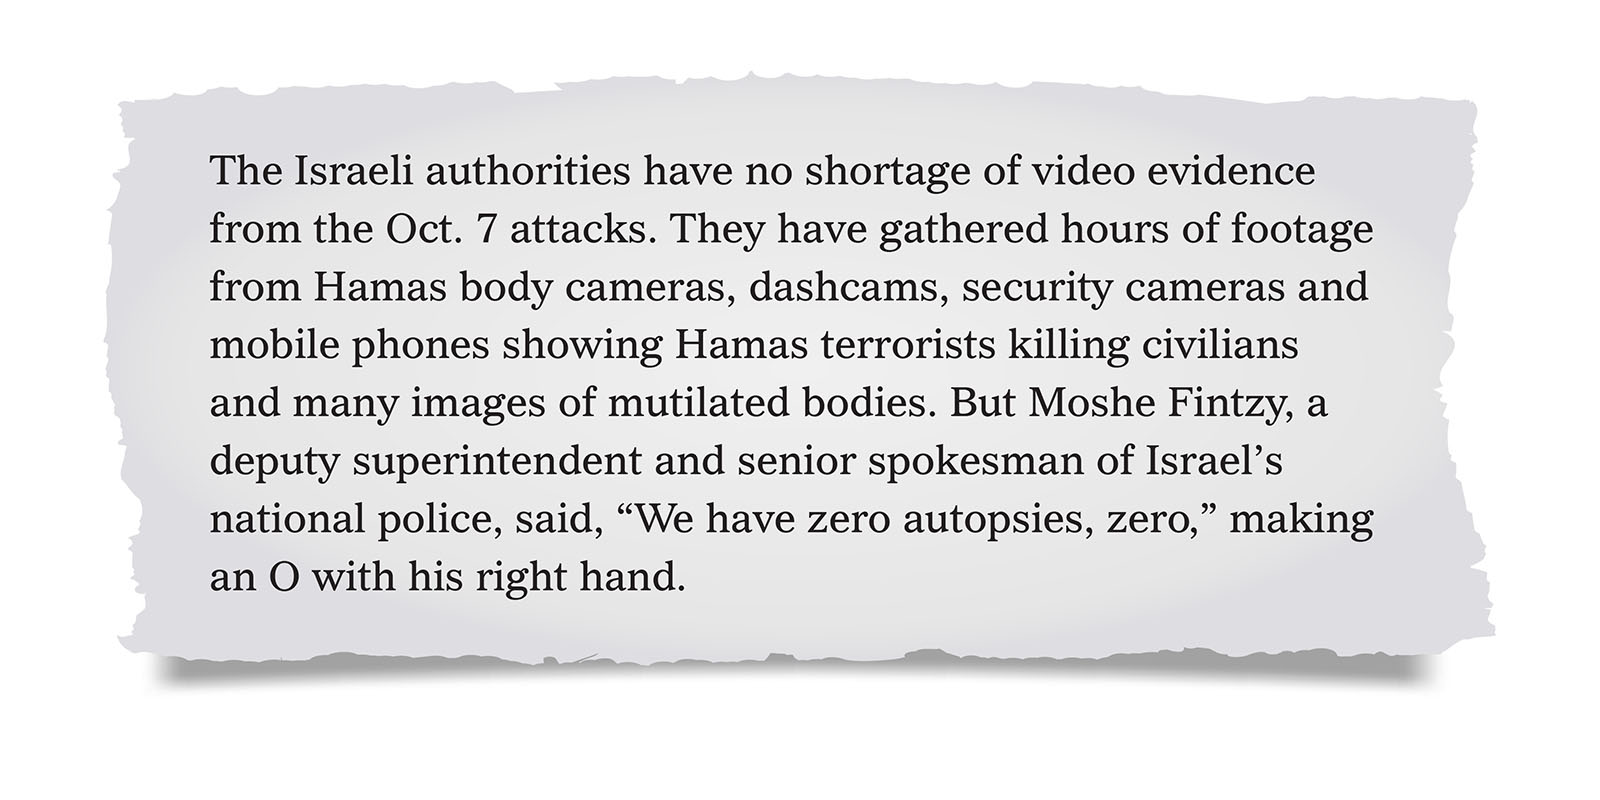 Pull quote:
The Israeli authorities have no shortage of video evidence from the Oct. 7 attacks. They have gathered hours of footage from Hamas body cameras, dashcams, security cameras and mobile phones showing Hamas terrorists killing civilians and many images of mutilated bodies. But Moshe Fintzy, a deputy superintendent and senior spokesman of Israel’s national police, said, “We have zero autopsies, zero,” making an O with his right hand.